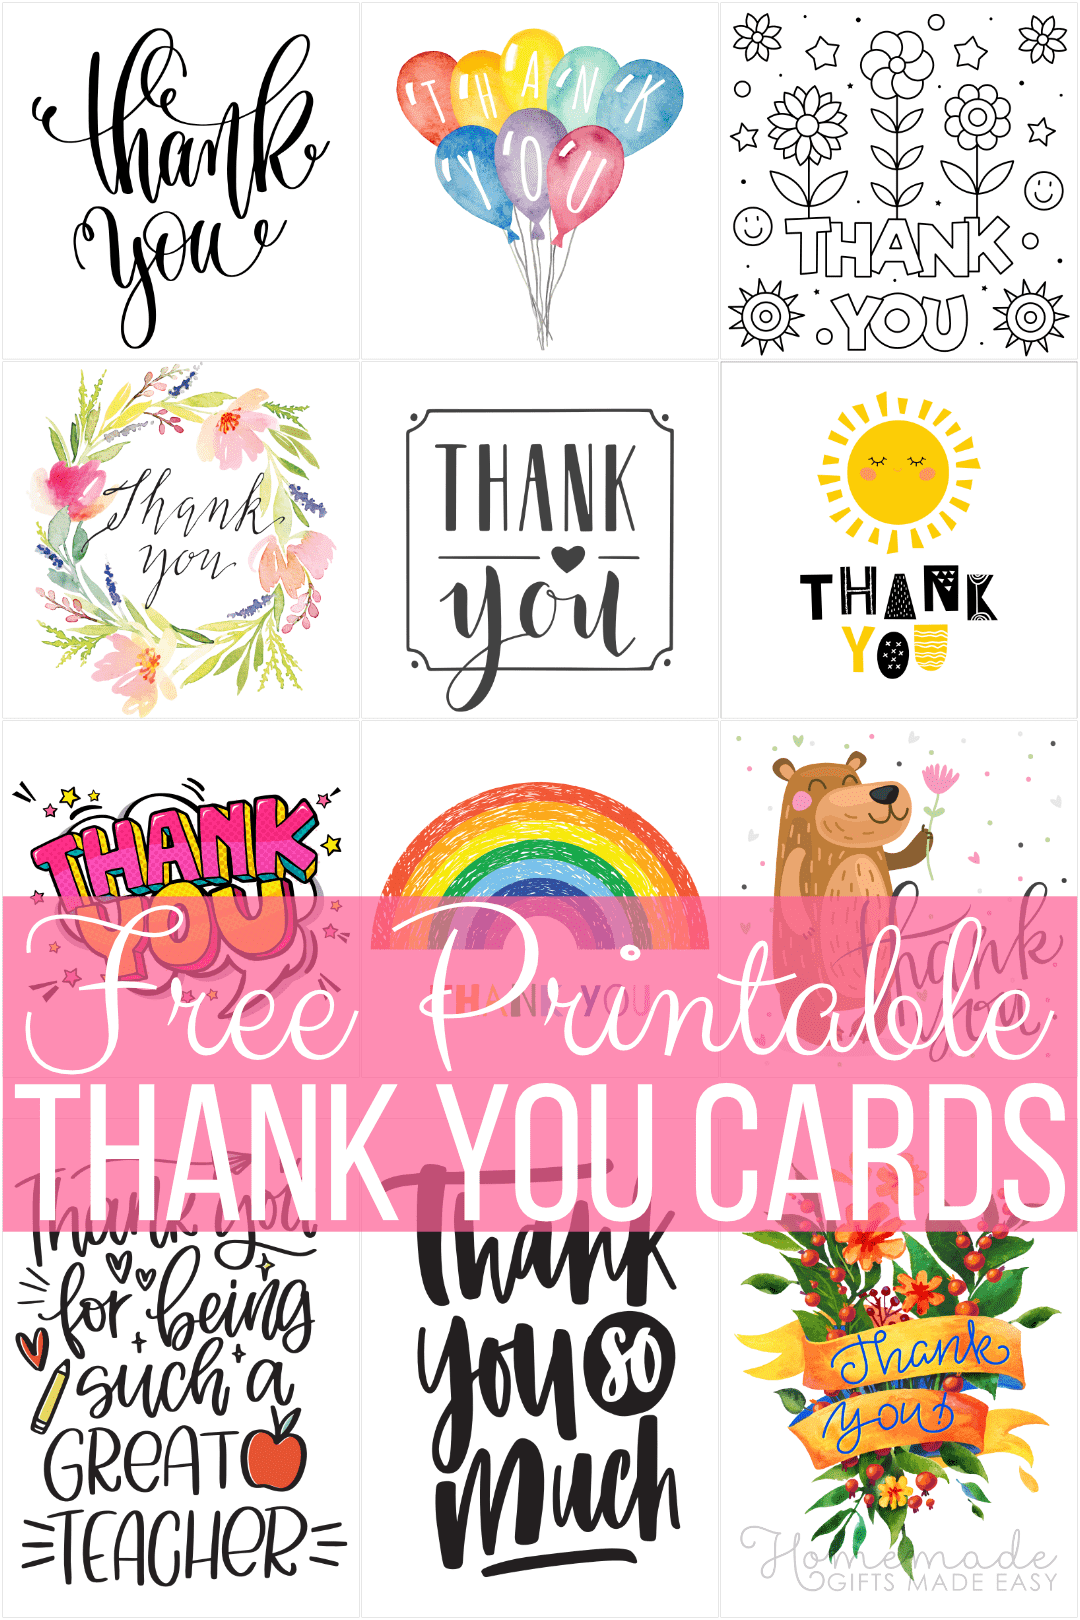 21 Free Printable Thank You Cards - Stylish High Quality Designs Intended For Christmas Thank You Card Templates Free